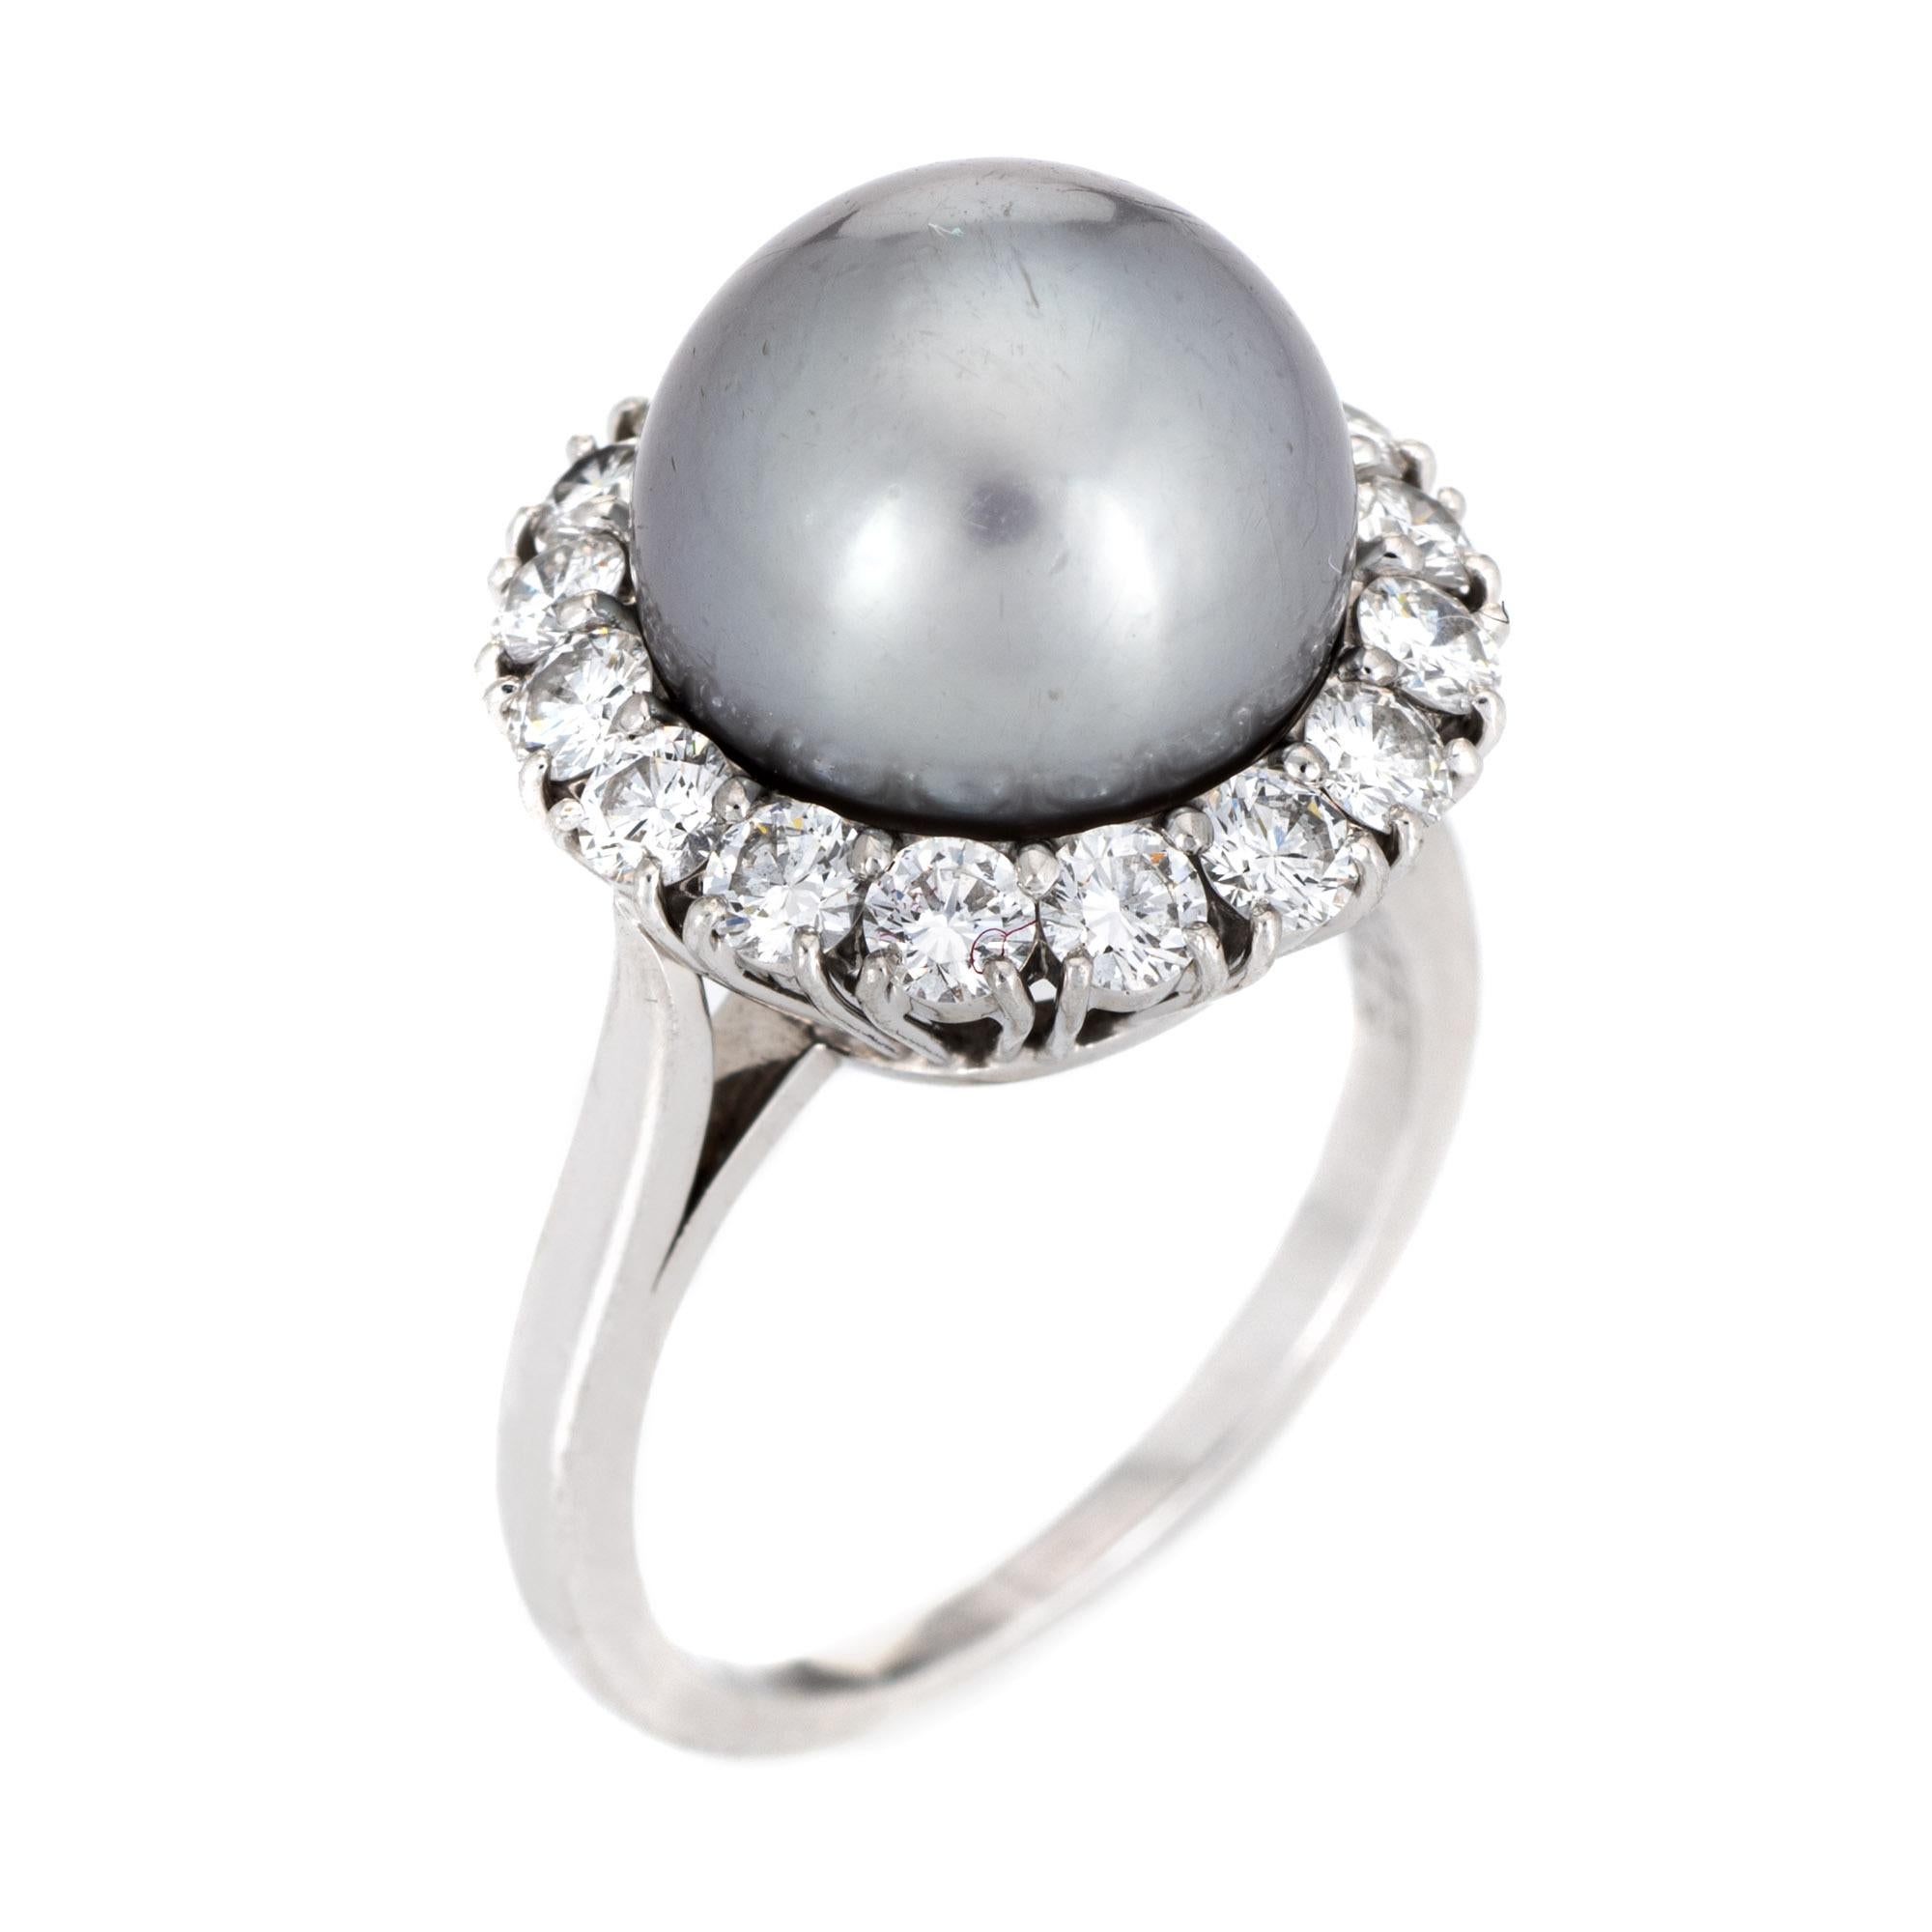 Finely detailed vintage Van Cleef & Arpels South Sea Pearl & diamond ring crafted in platinum (circa 1980s to 1990s). 

South Sea Pearl measures 11mm. 16 diamonds total an estimated 1.20 carats (estimated at E-F color and VVS2 clarity). The pearl is